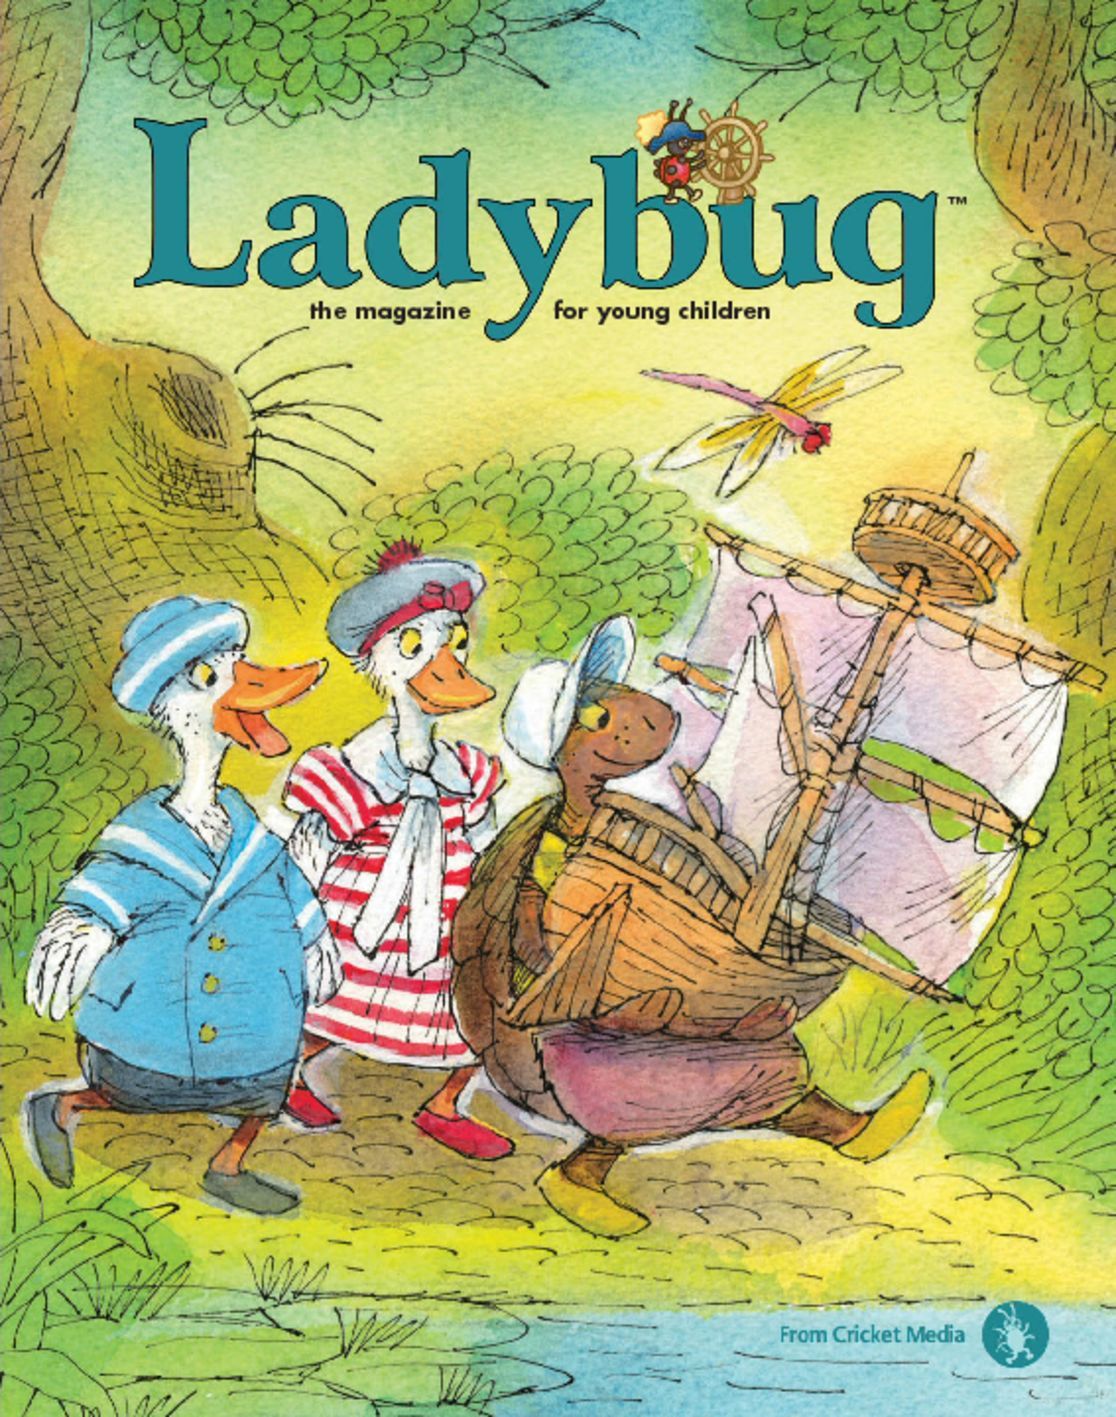 Ladybug Magazine | Stories, Poems, and Songs Magazine for Young Kids ...